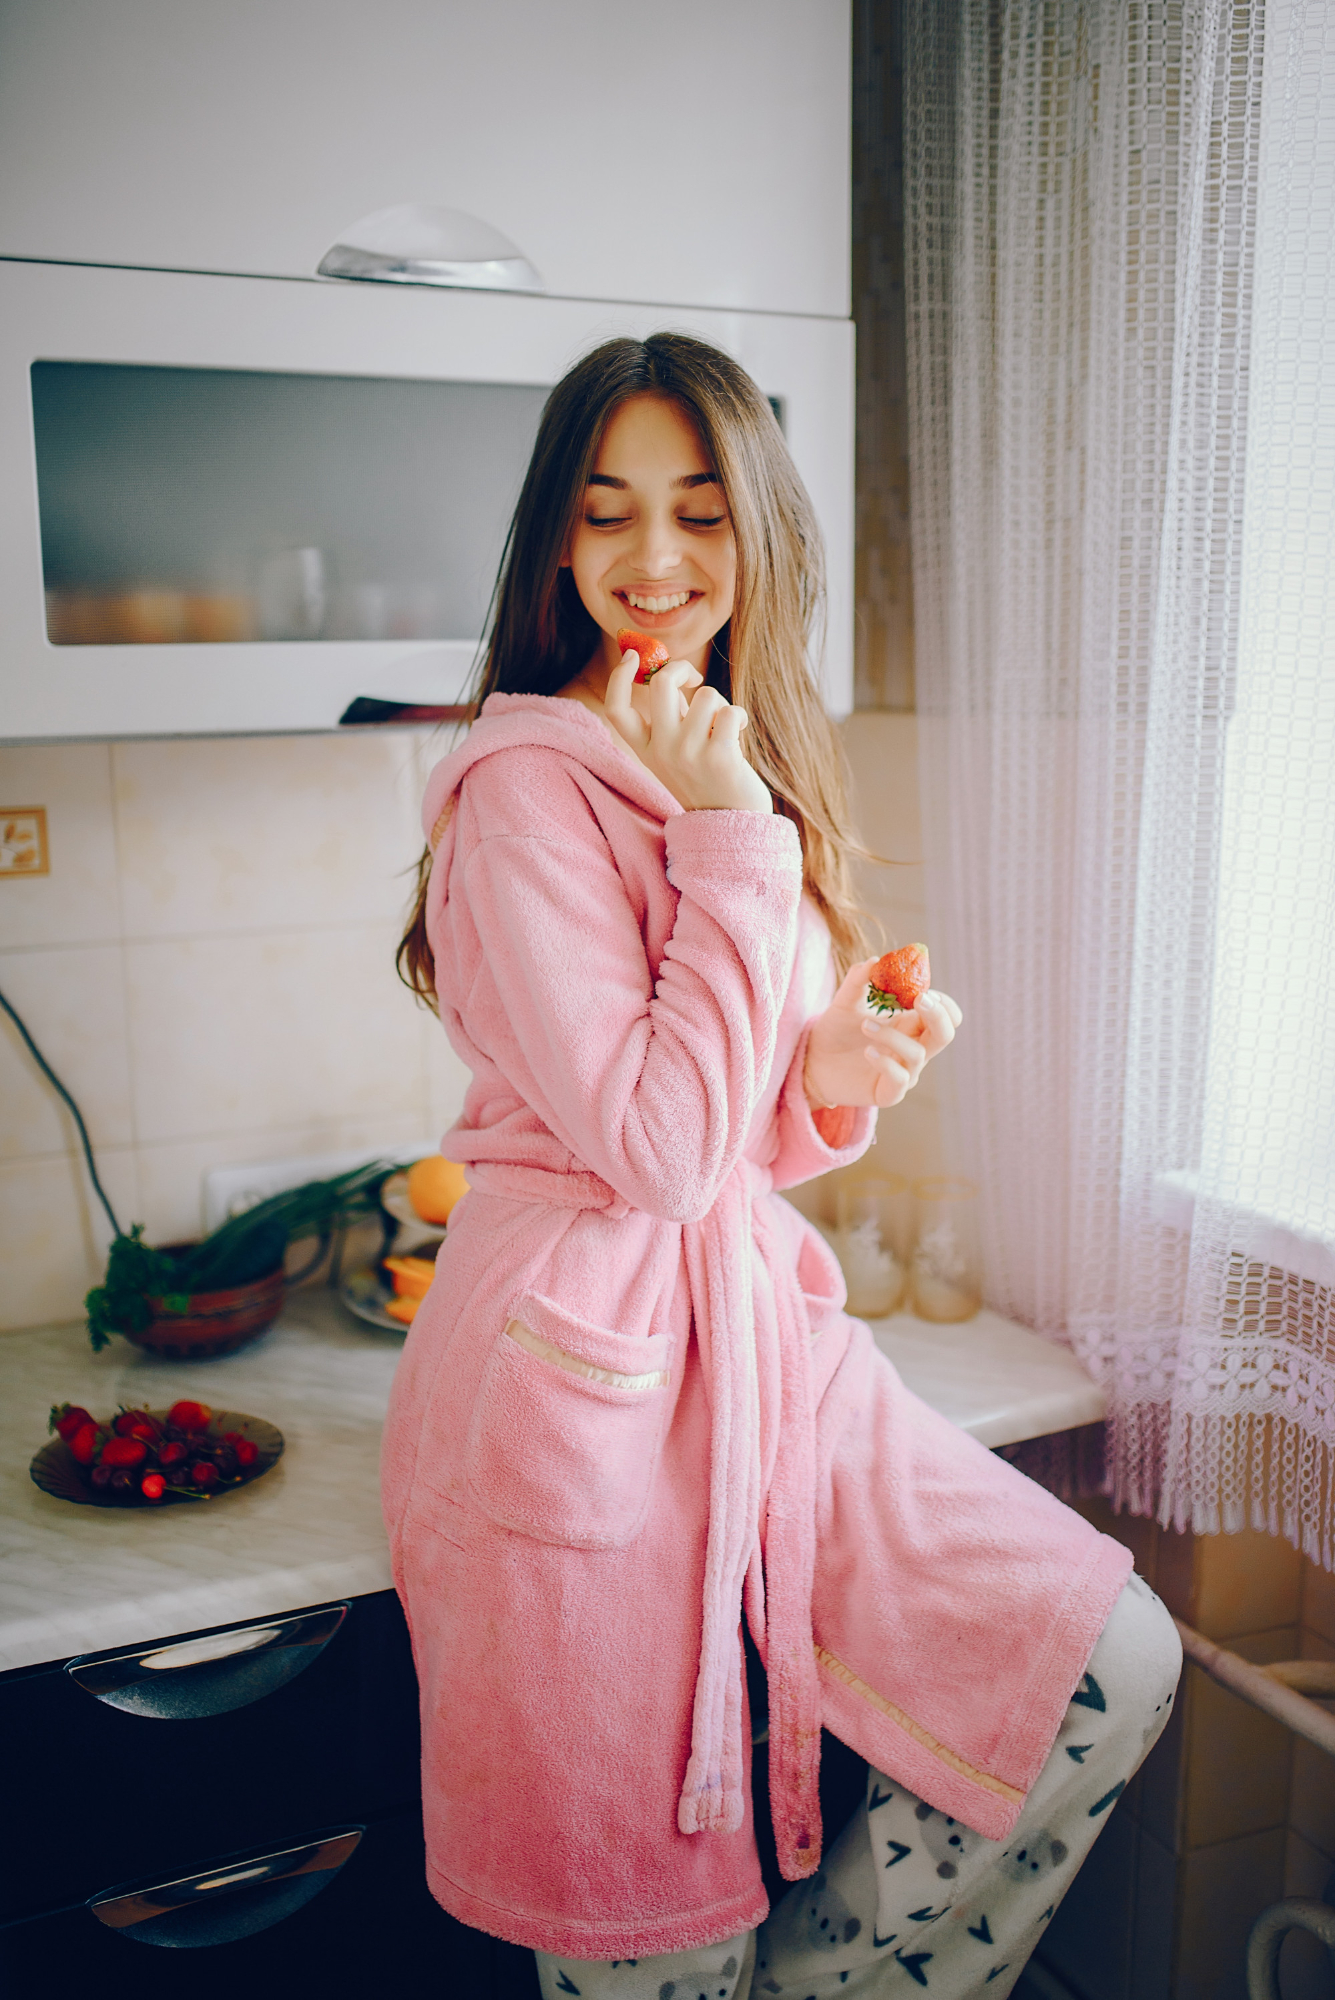 A woman smiling while dressed in a gown and pajamas | Source: Freepik